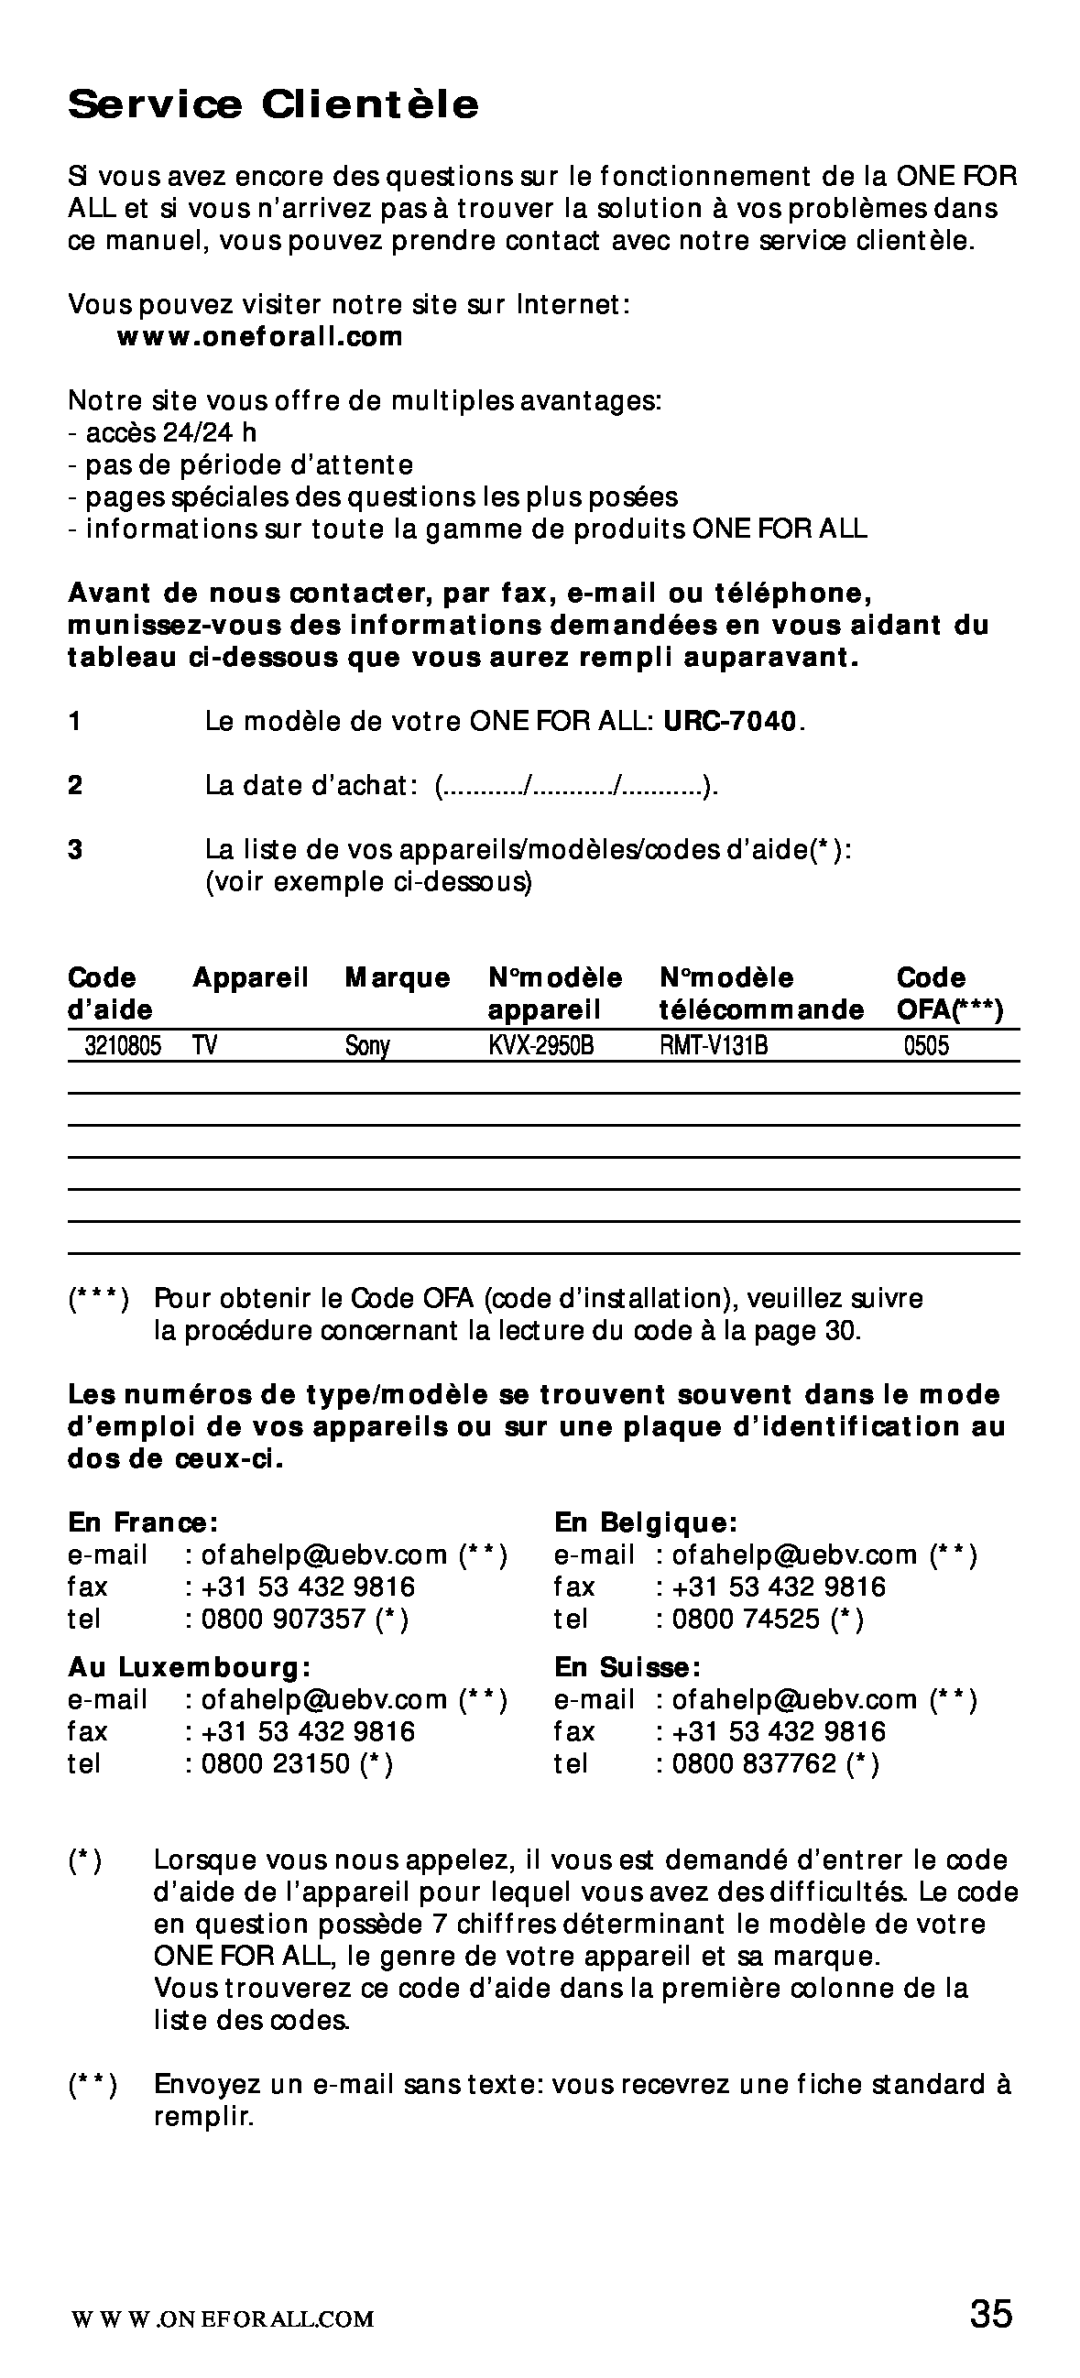 One for All URC-7040 manual Service Clientèle, Sony, KVX-2950B, RMT-V131B, 0505 